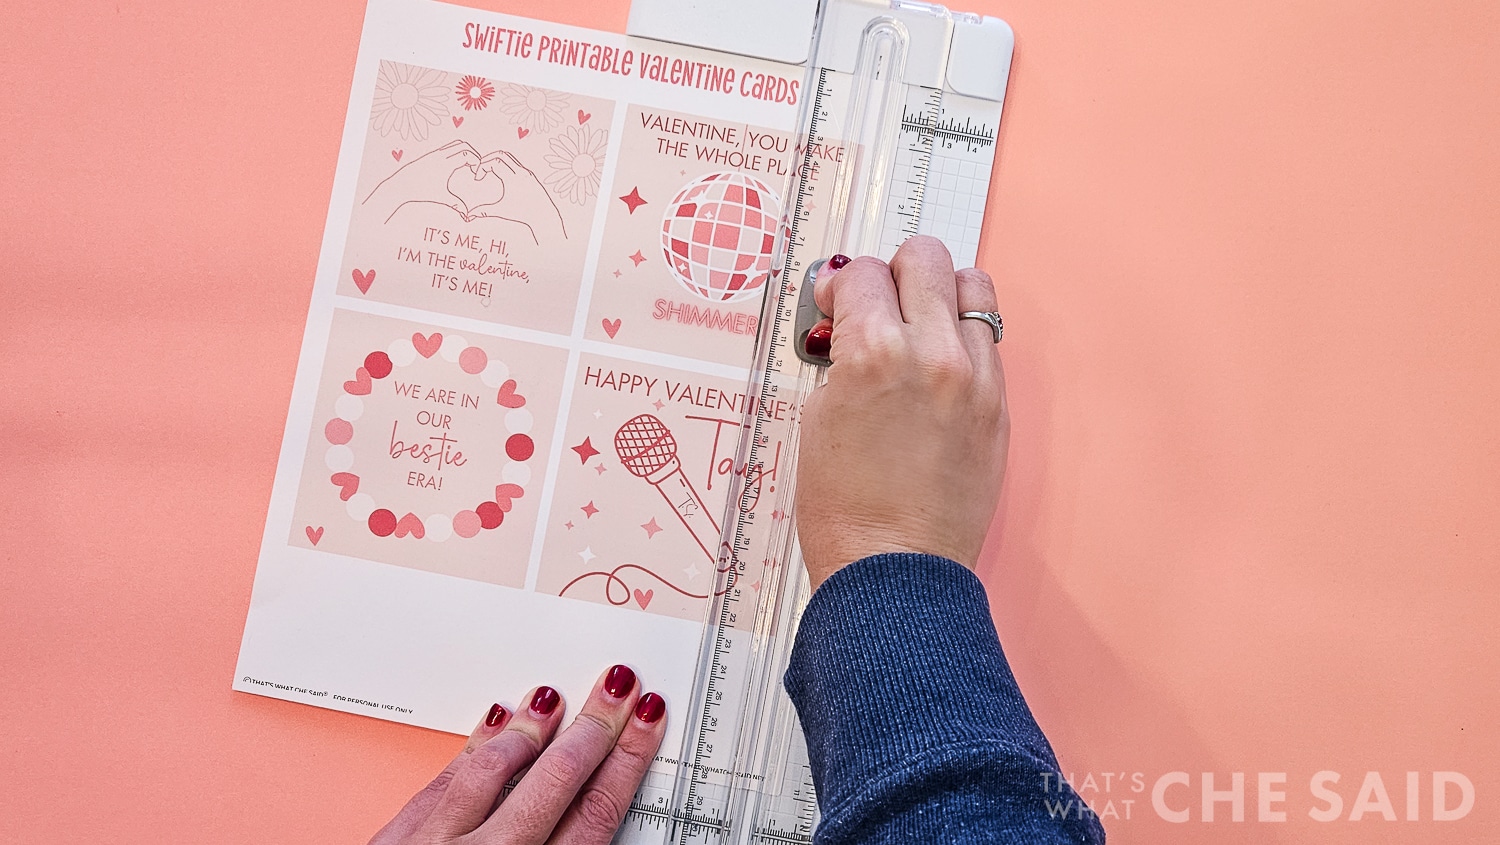 Cutting Taylor Swift Valentine printable apart into four cards with a paper cutter.